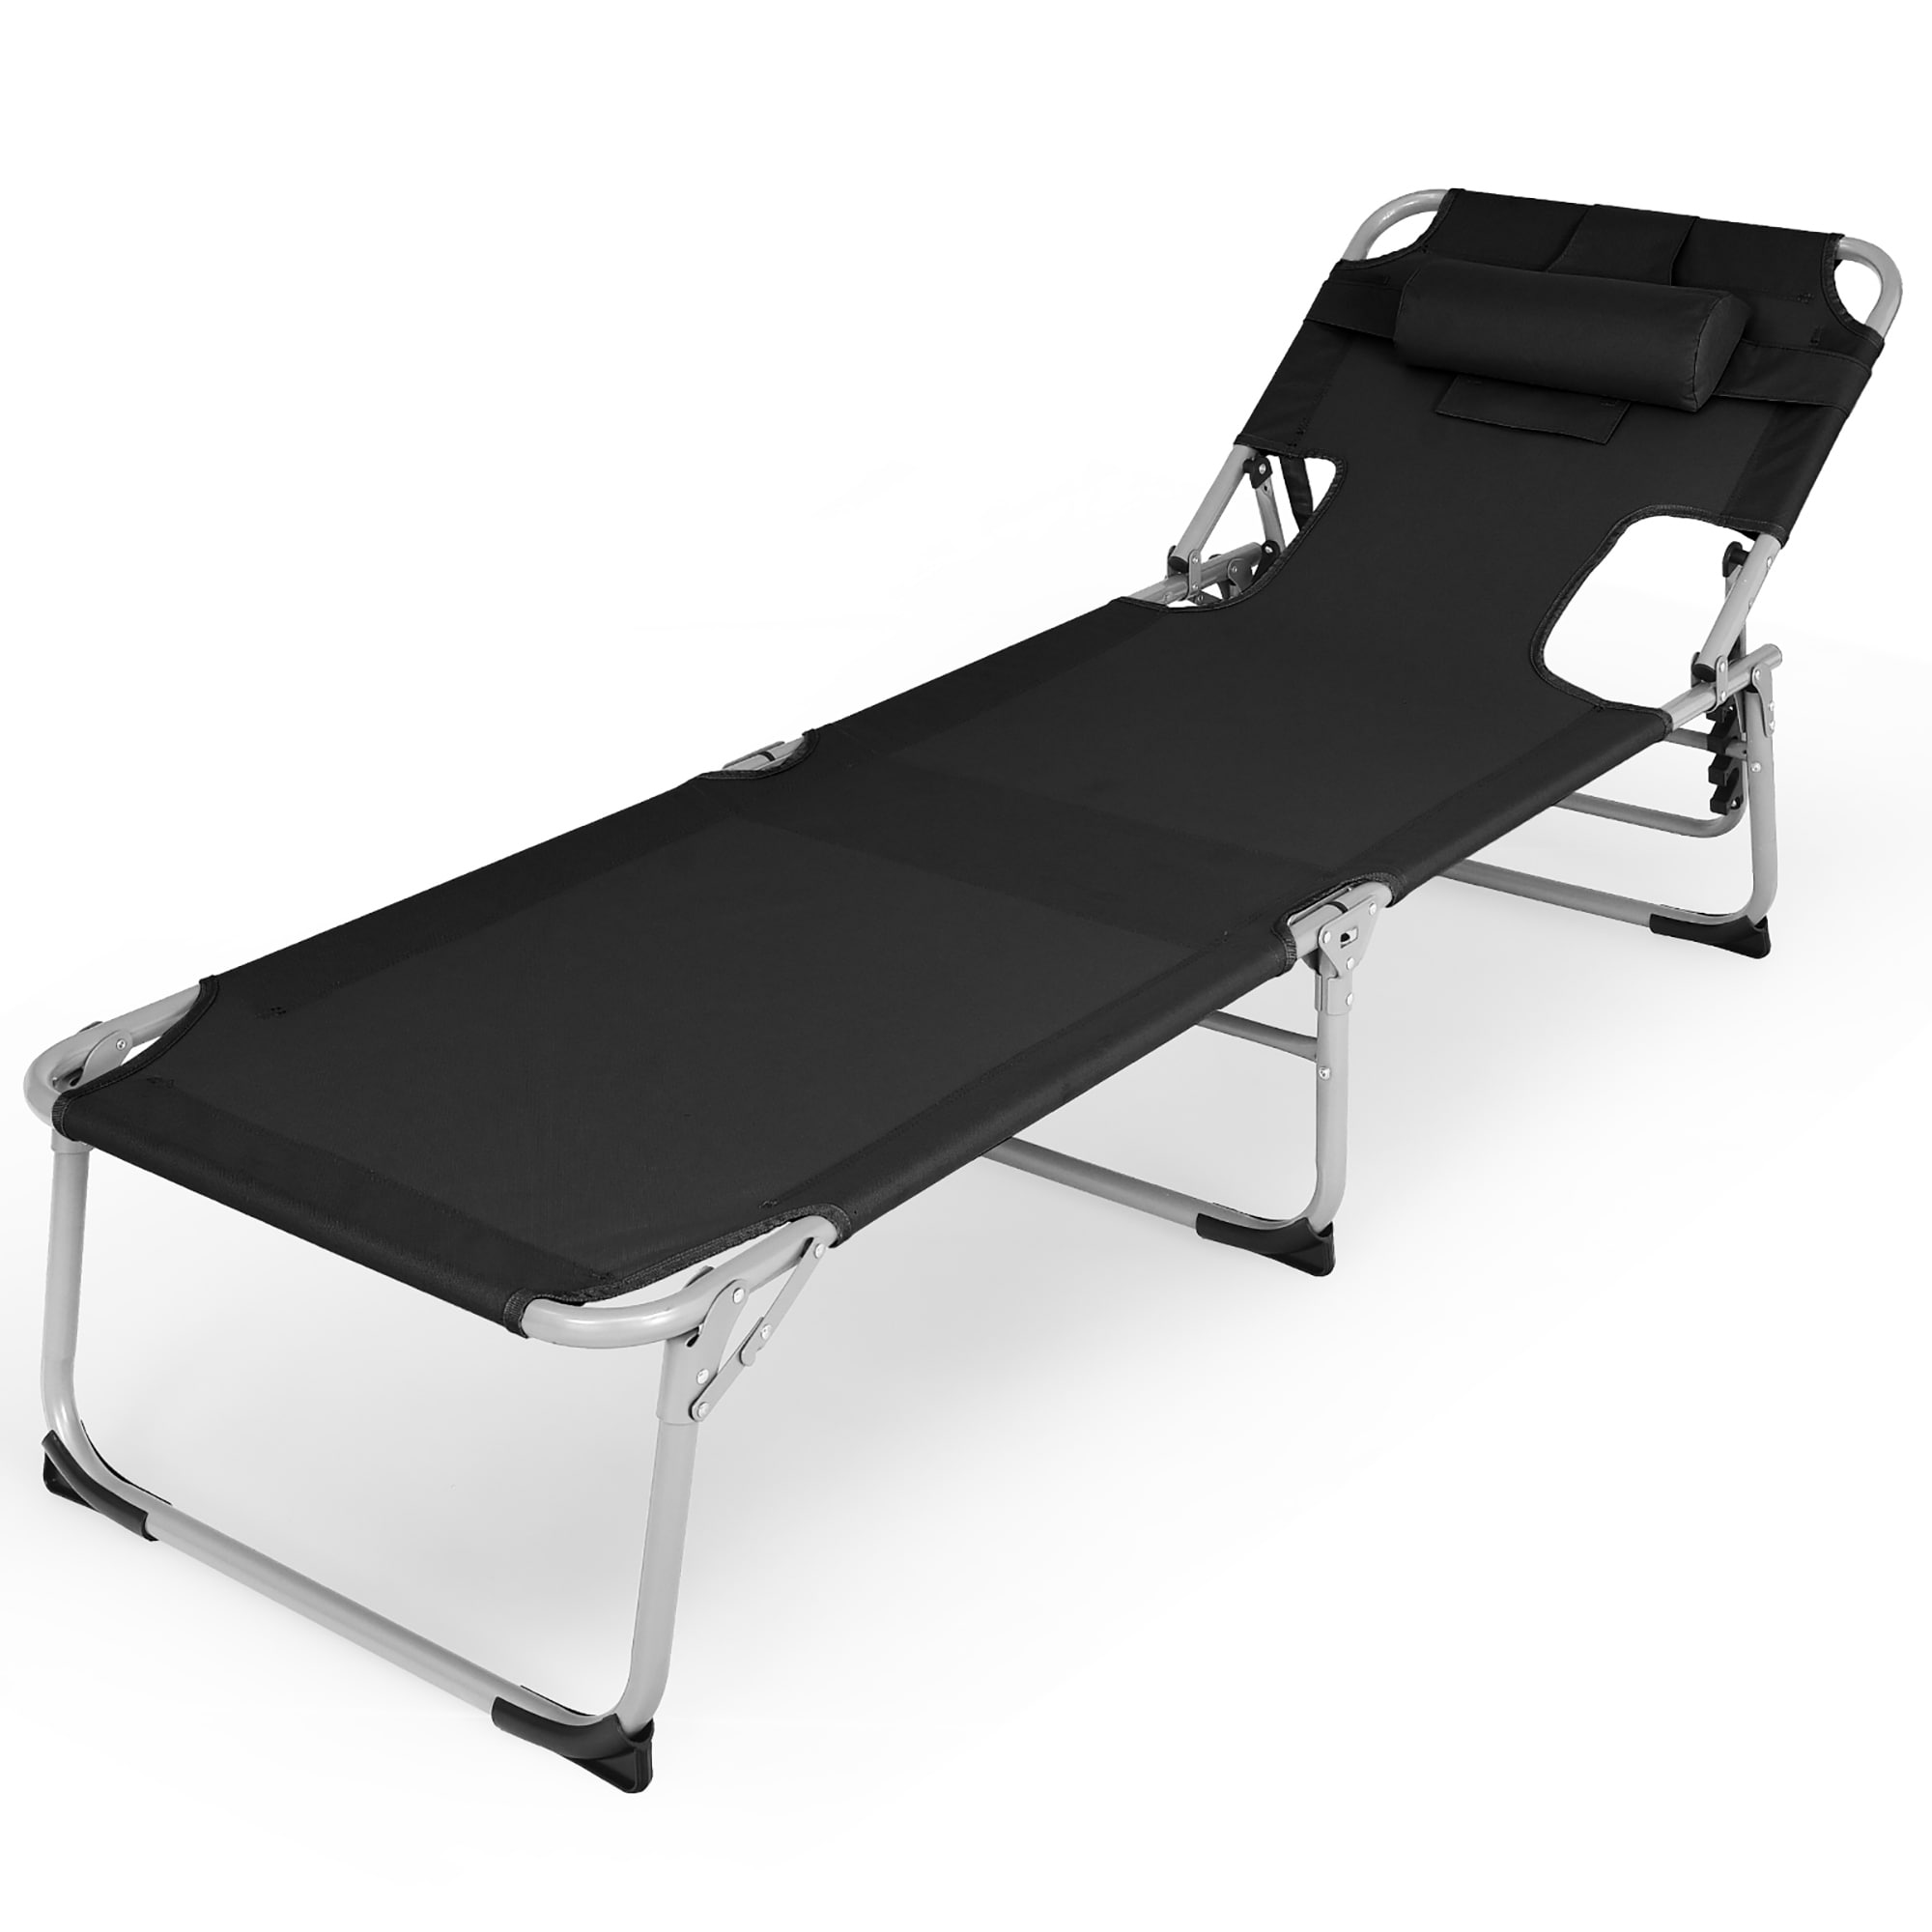 Beach Chaise Lounge Adjustable Sunbathing Chair With Face Cavity